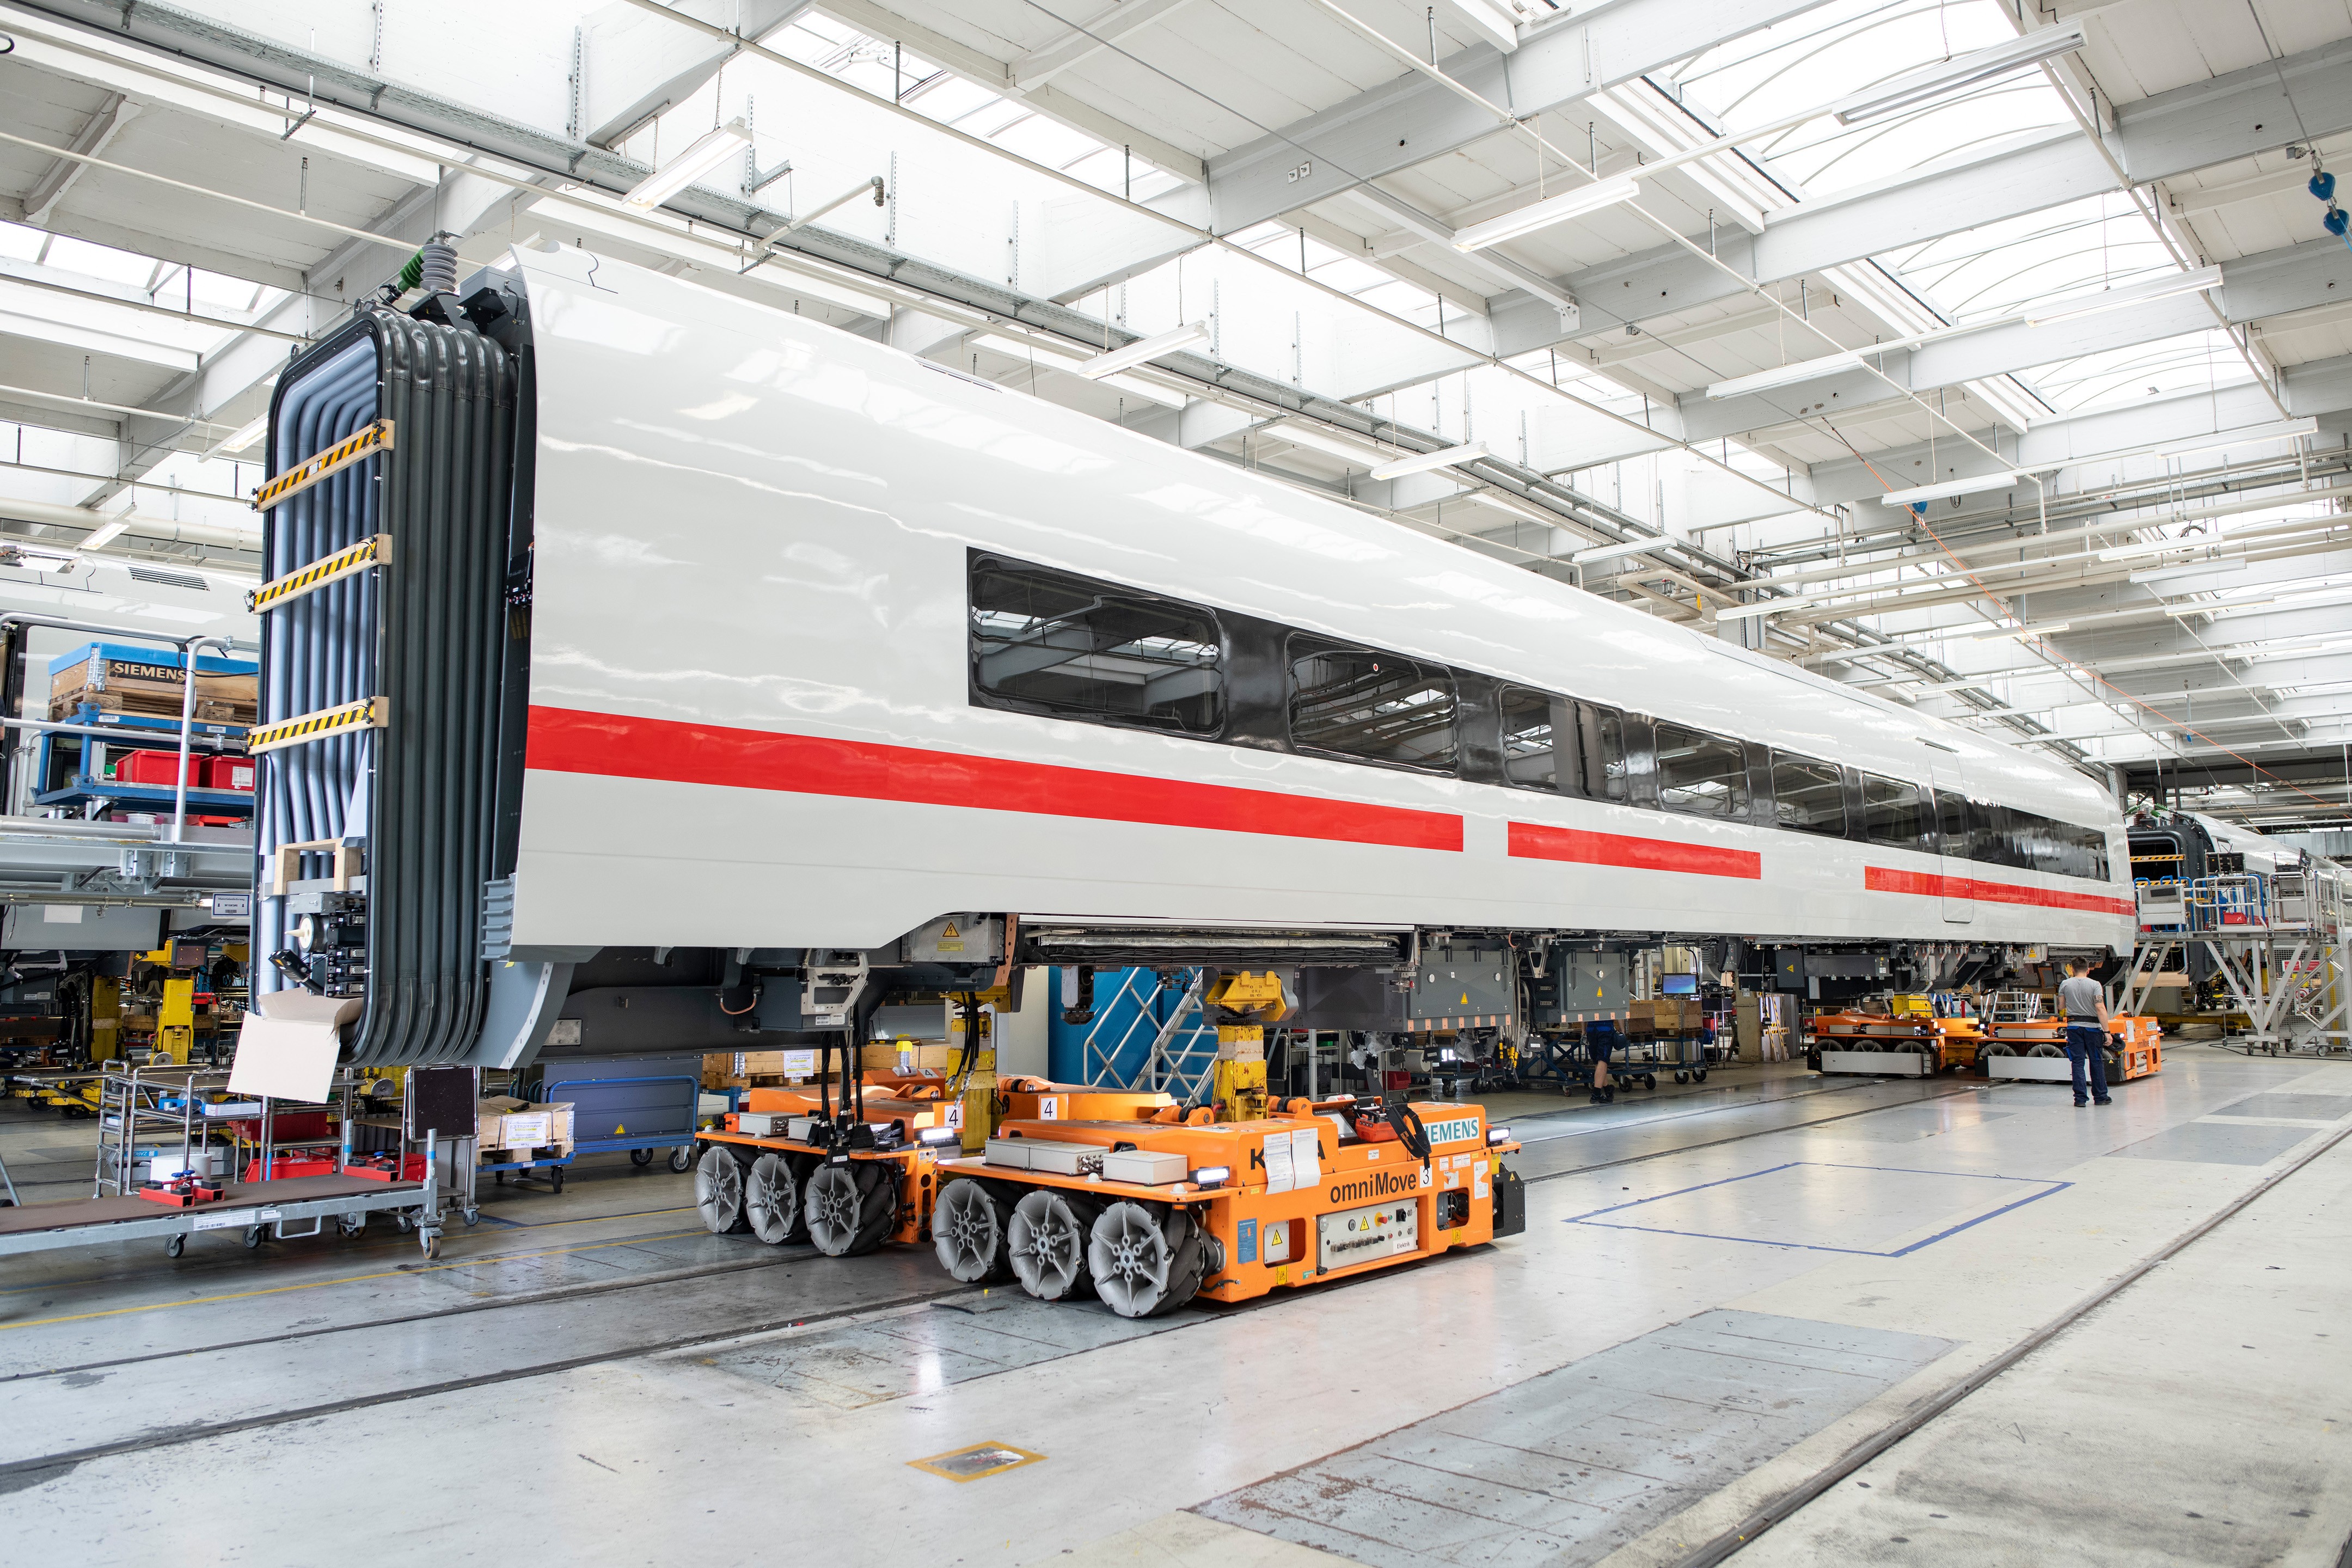 Largest order is building ice trains for deutsche bahn pany